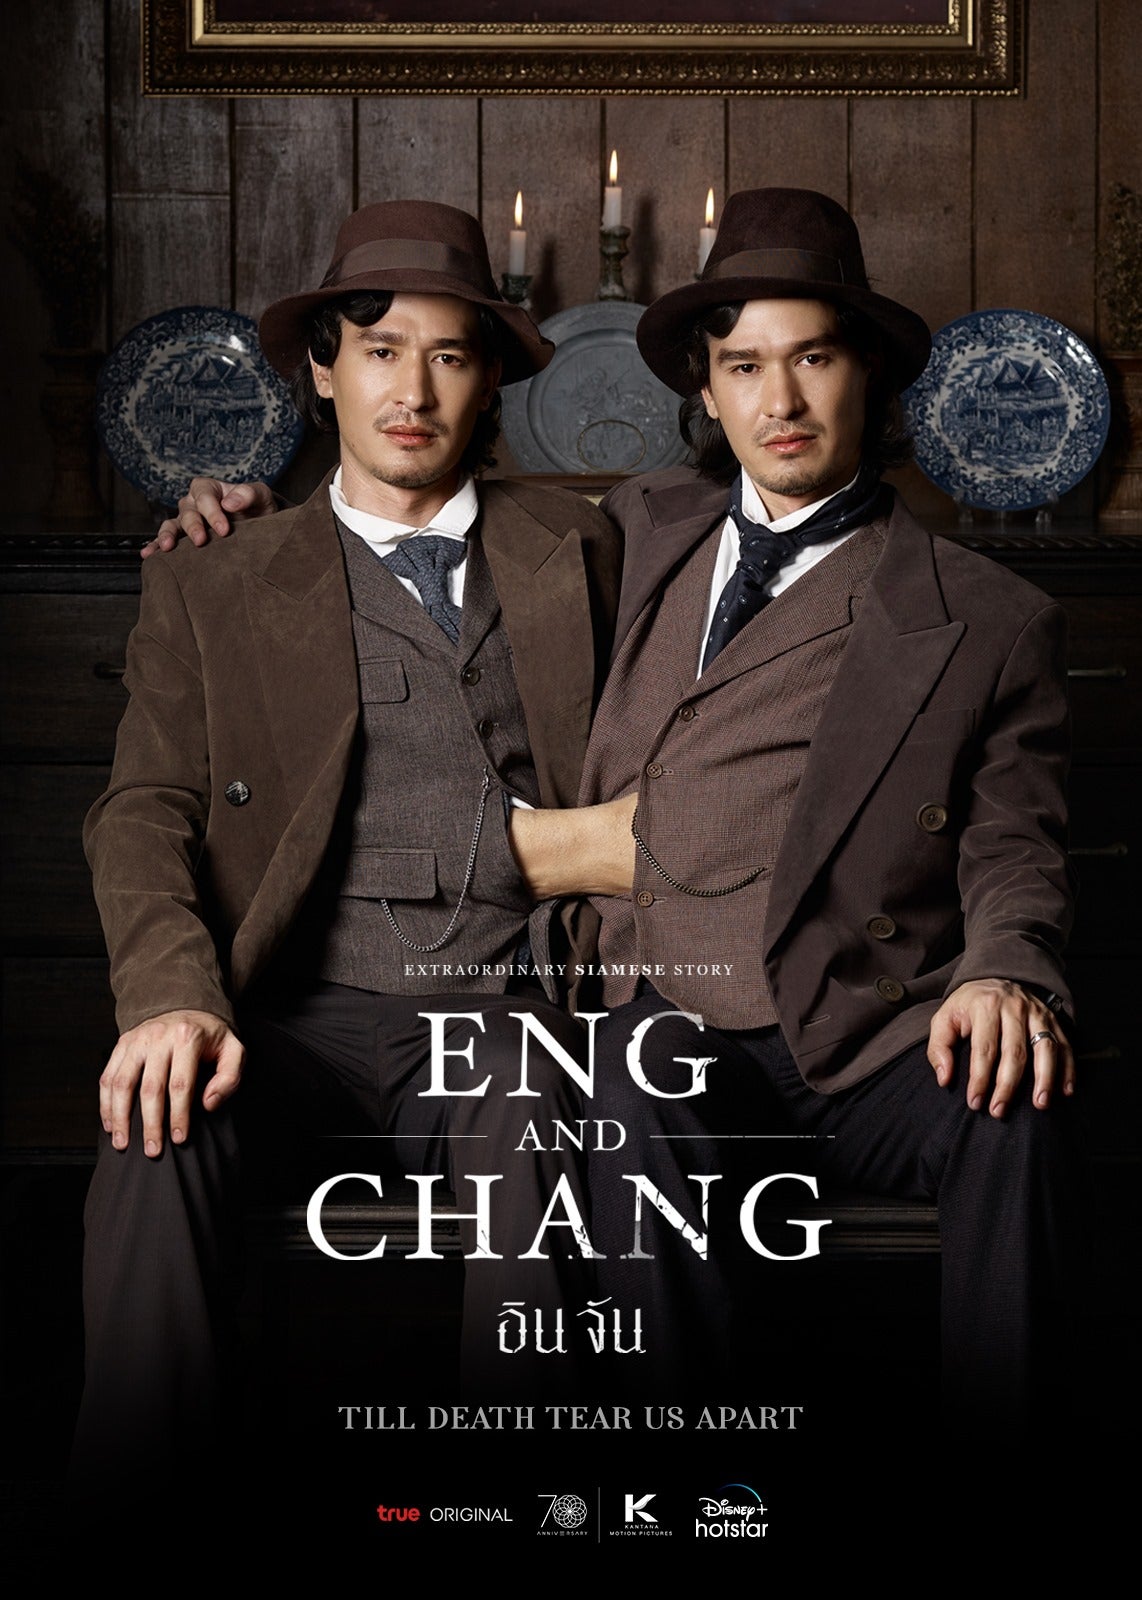 TV ratings for Extraordinary Siamese Story: Eng And Chang (อินจัน) in Chile. Disney+ TV series